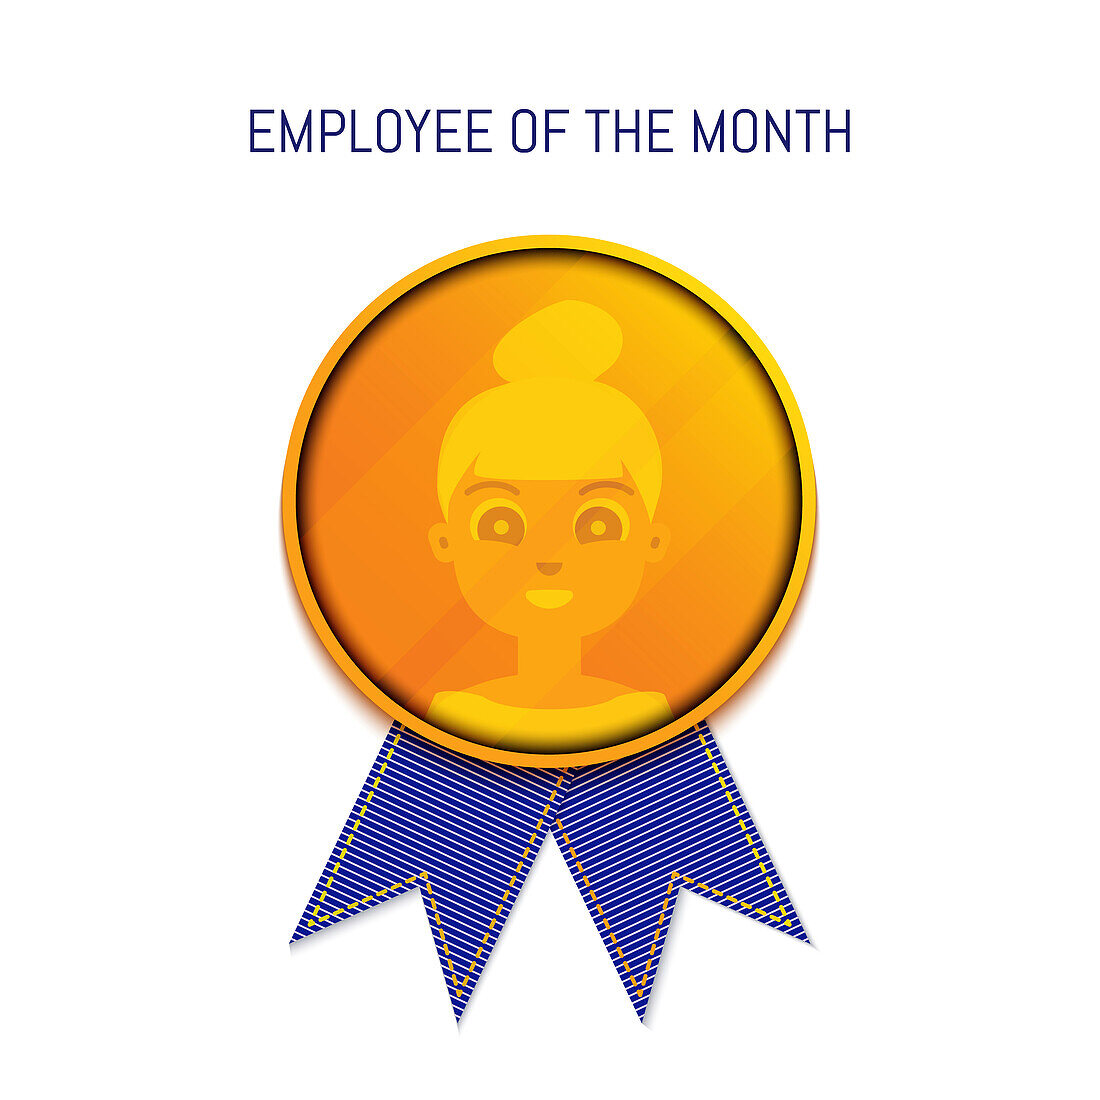 Employee of the month, conceptual illustration